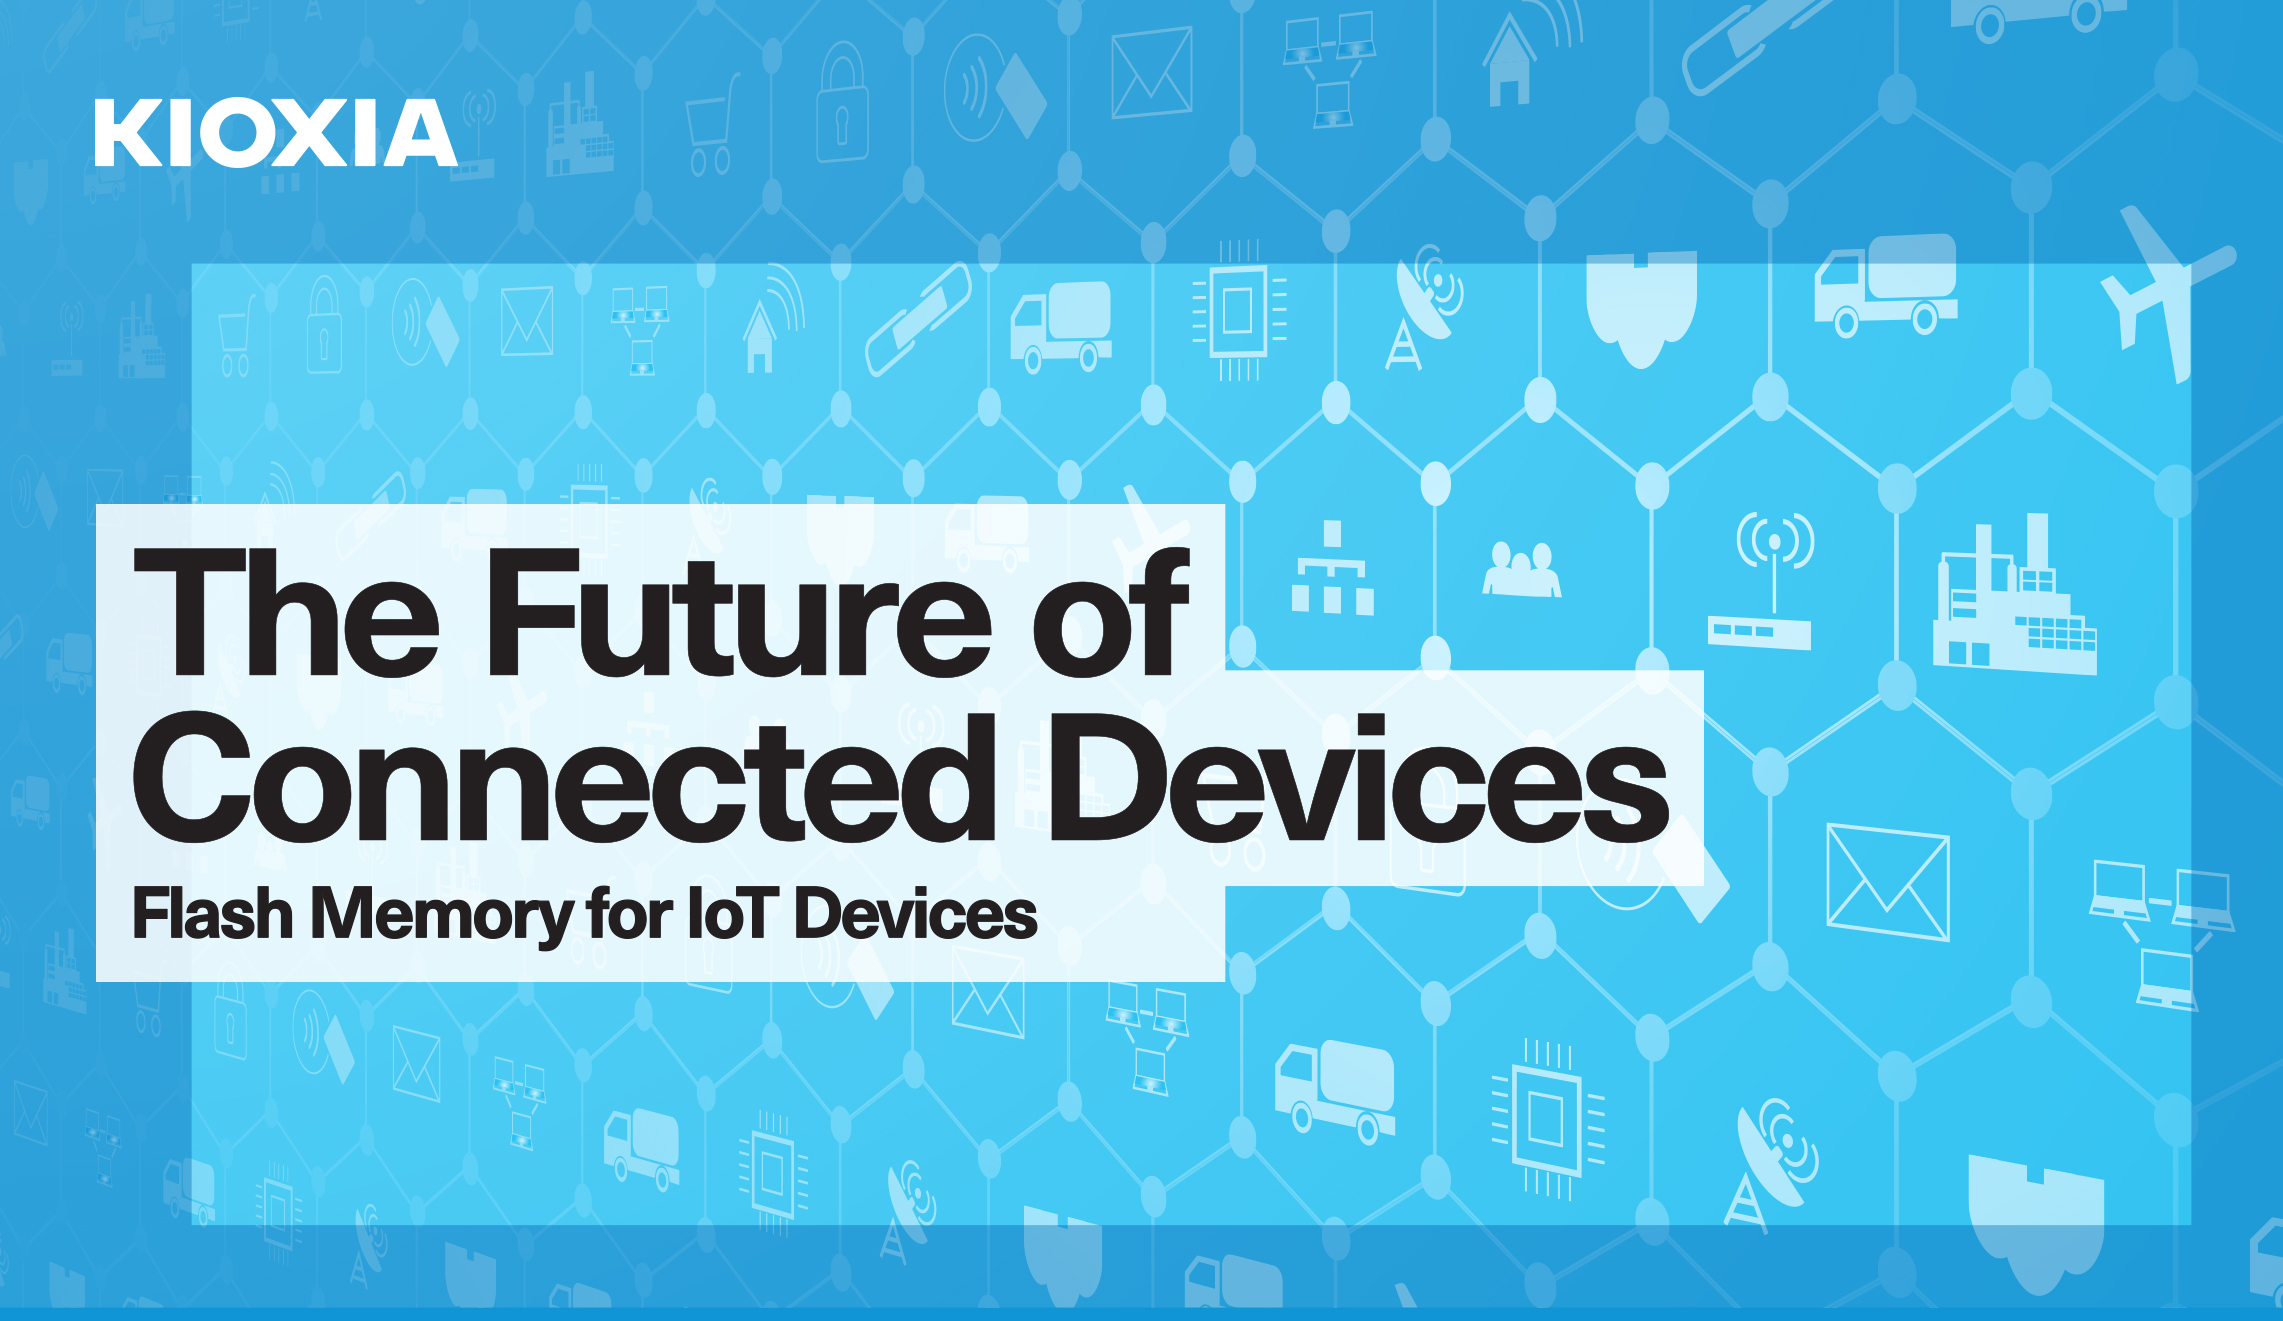 The Future of Connected Devices